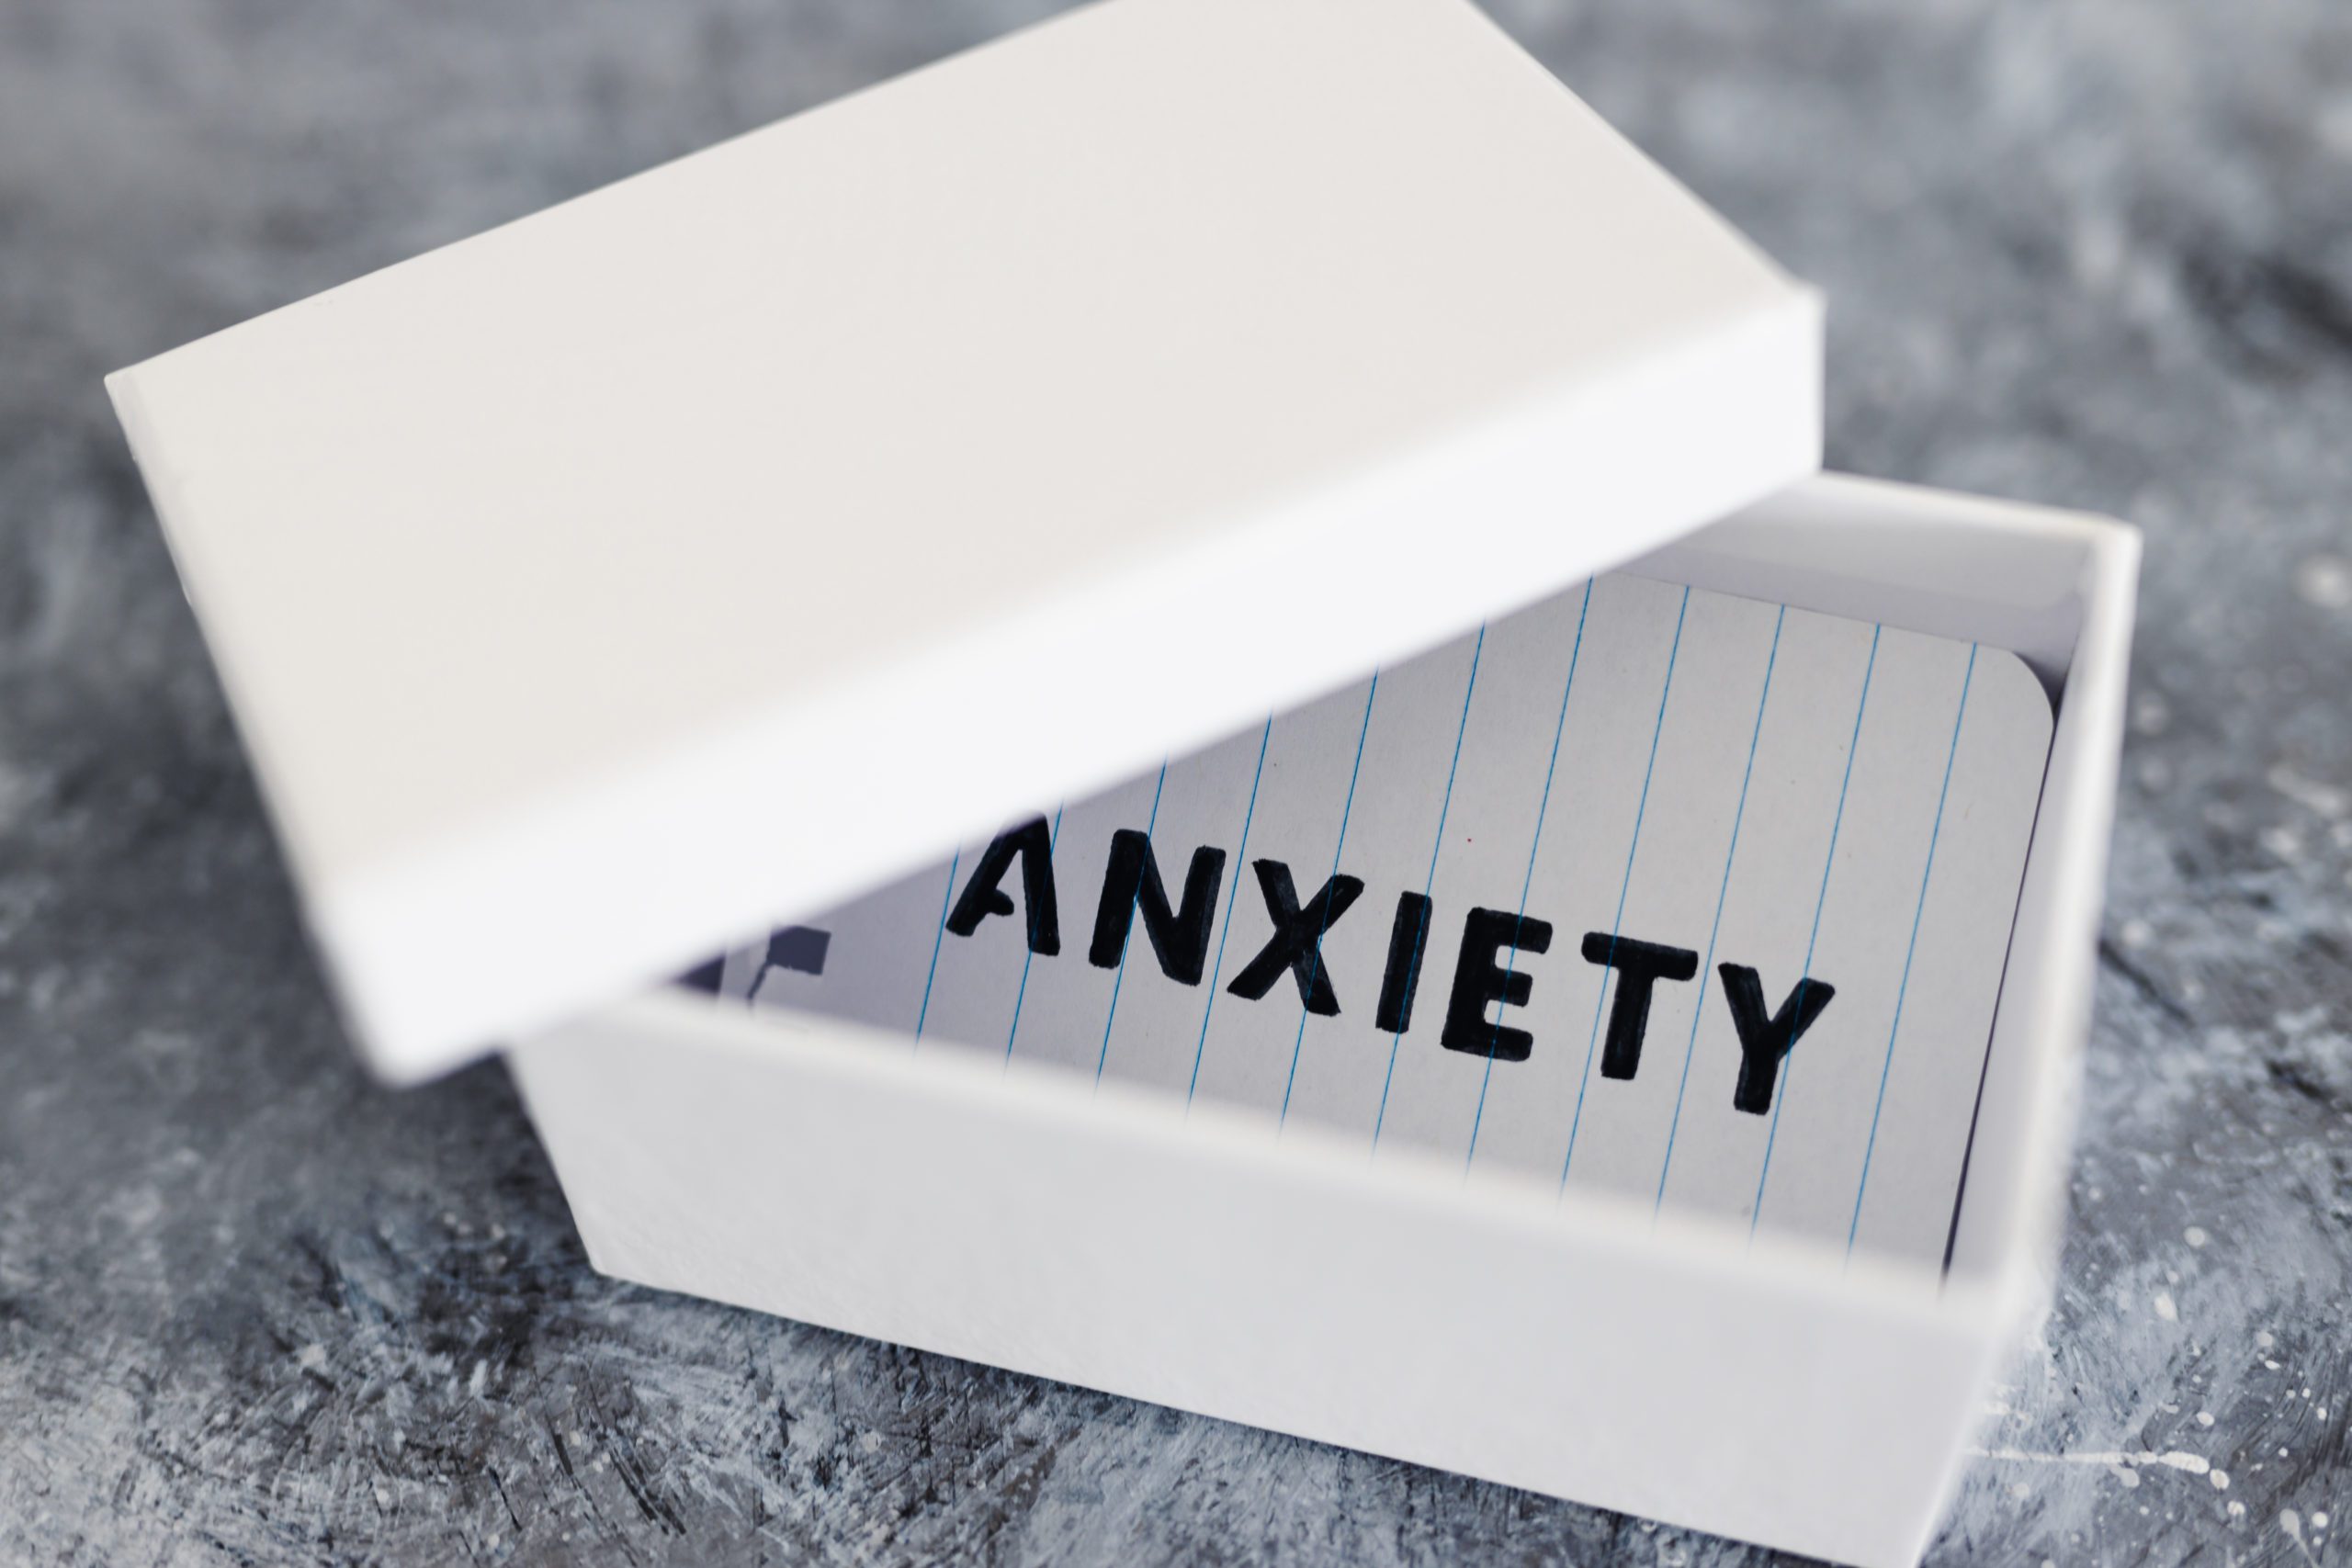 The Powerful Toolkit That Will Help Calm Your Anxiety